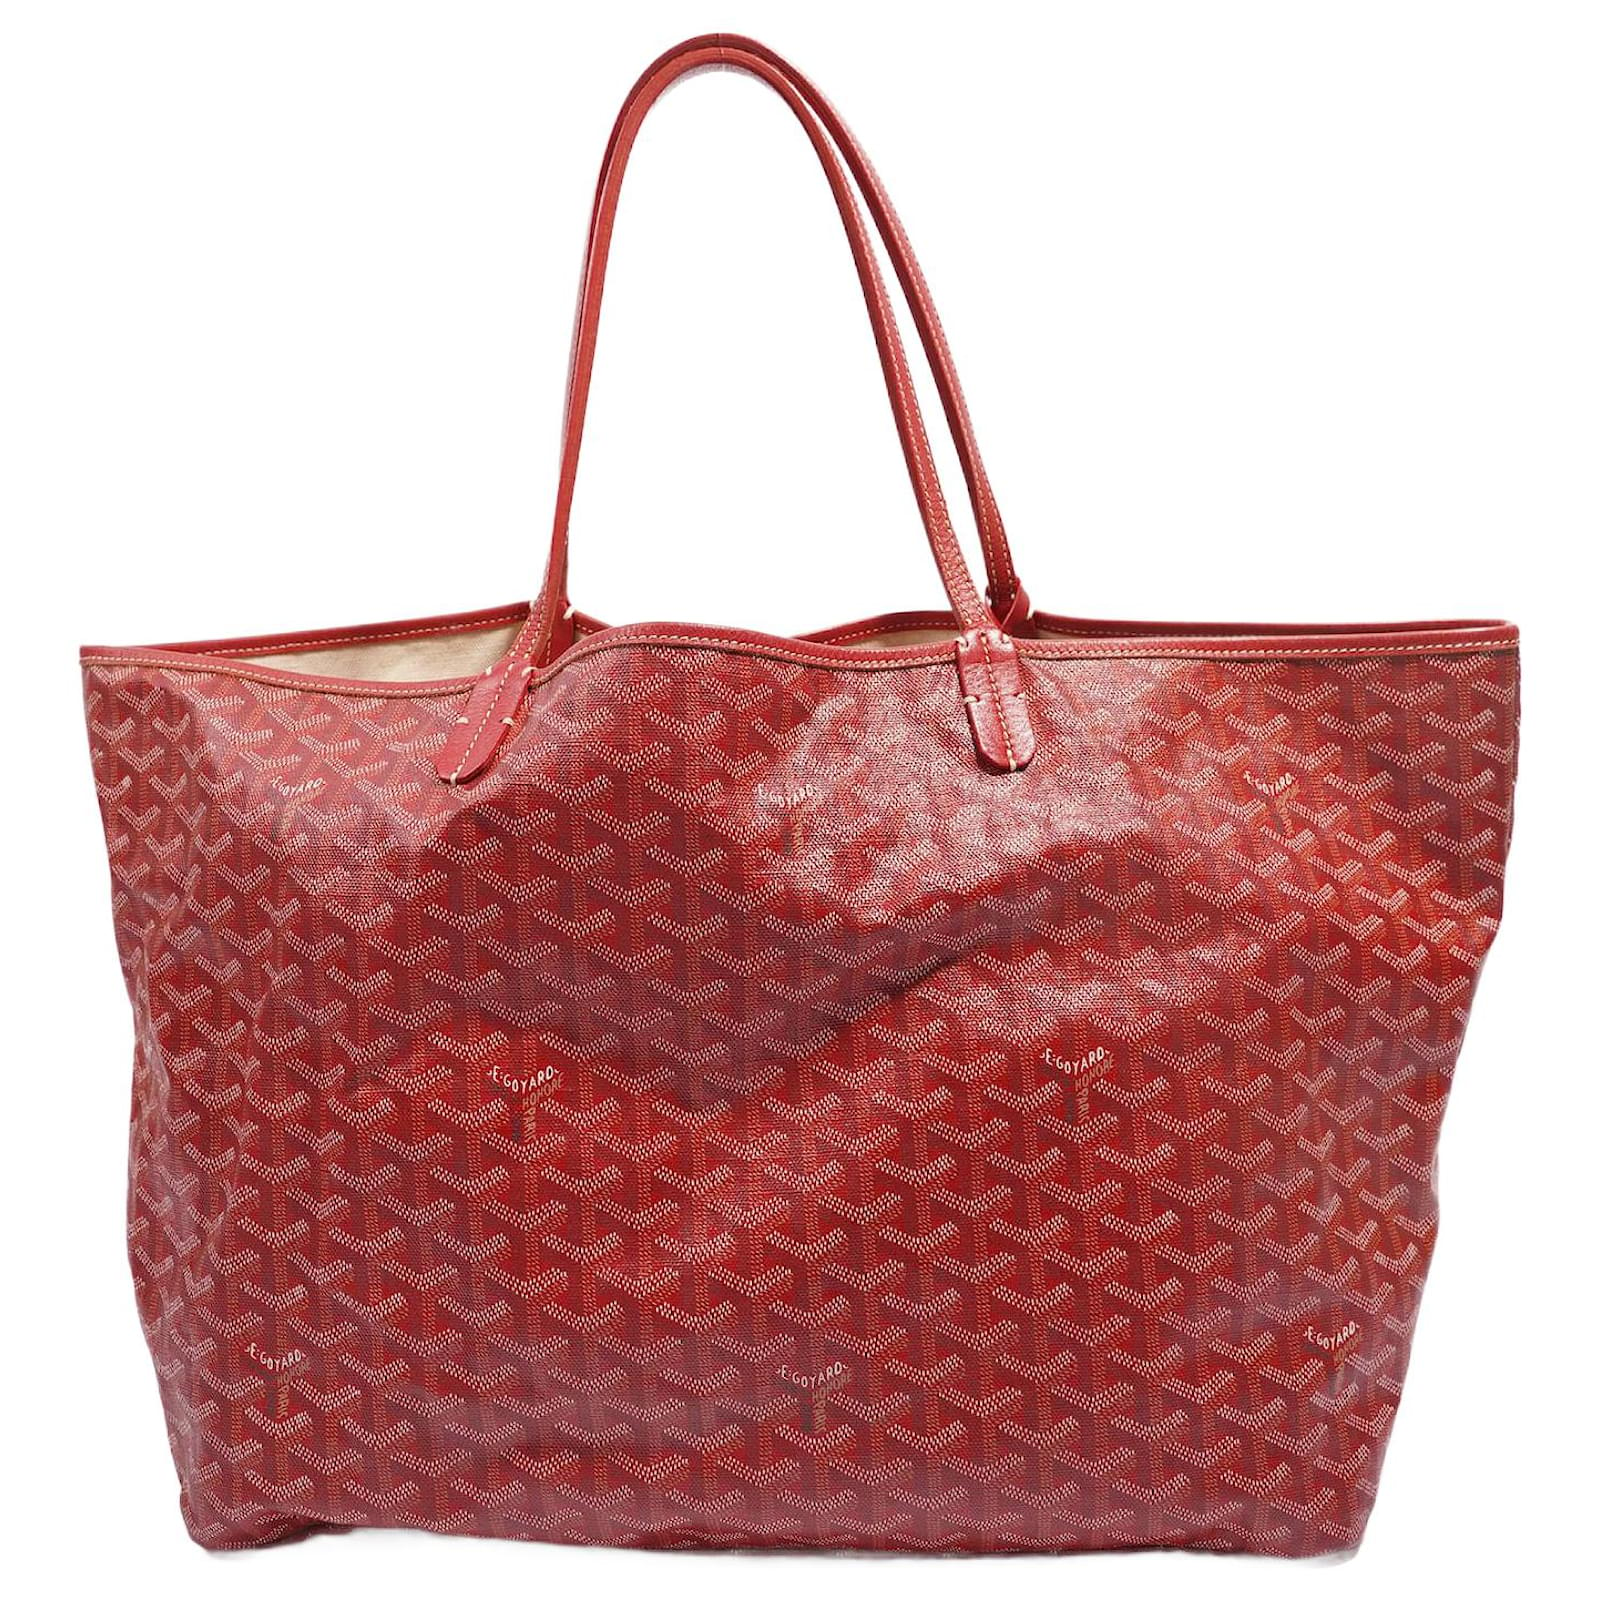 RED GOYARD ST LOUIS GM TOTE BAG WITH POUCH AND DUSTBAG